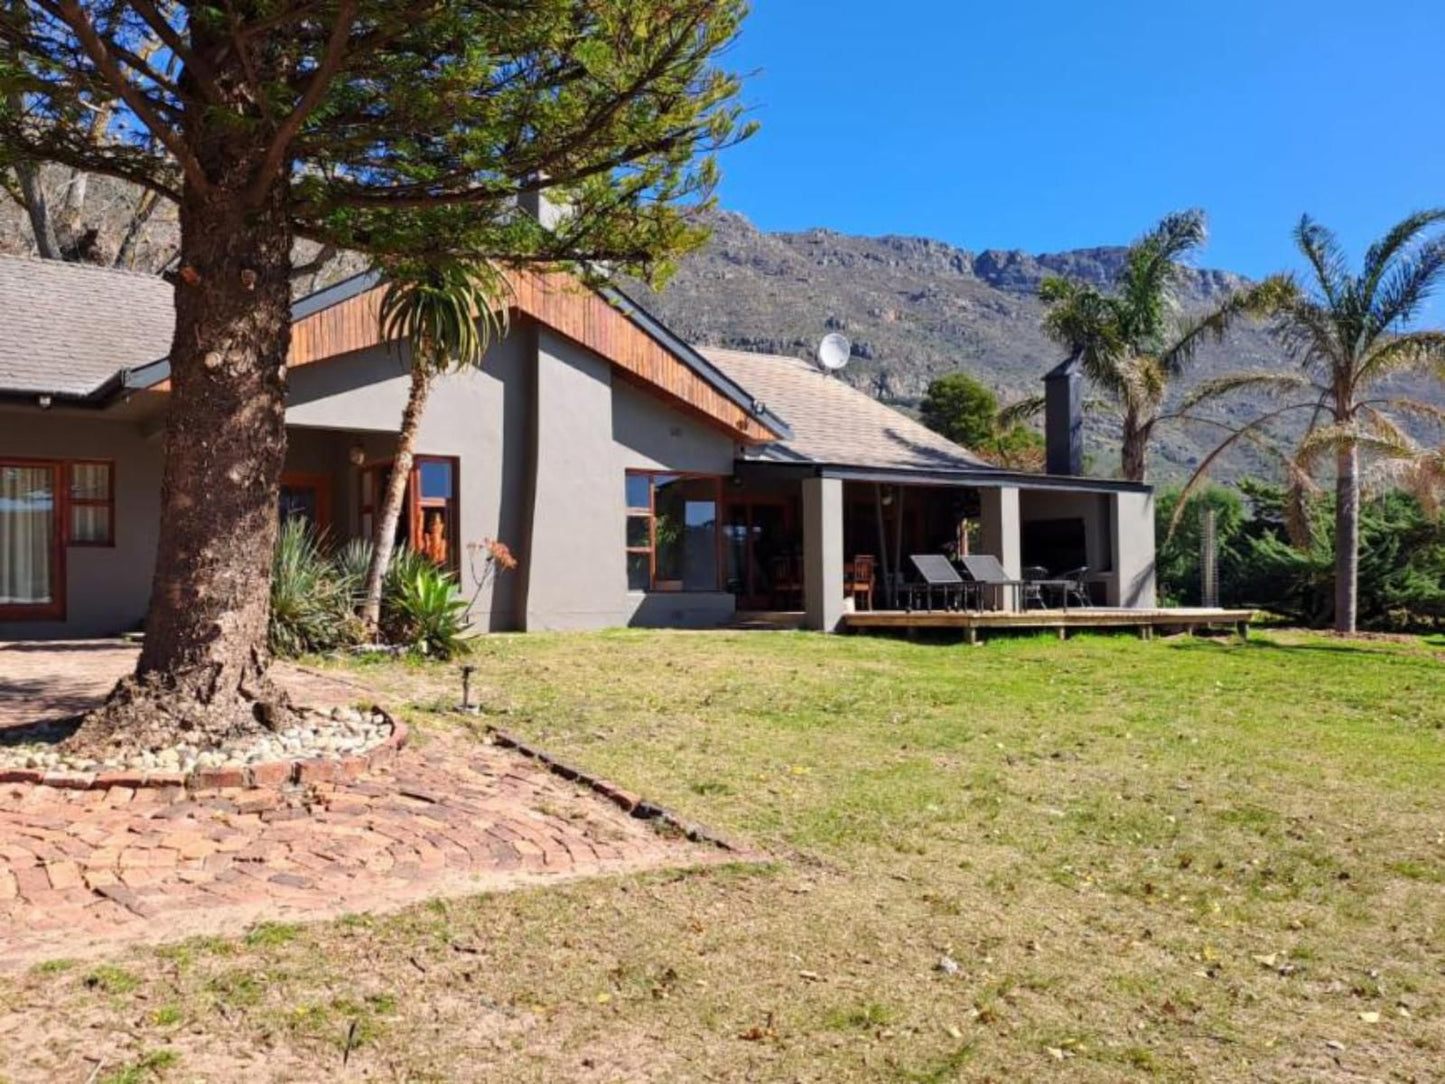 River Edge Accommodation Bainskloof Western Cape South Africa House, Building, Architecture, Palm Tree, Plant, Nature, Wood